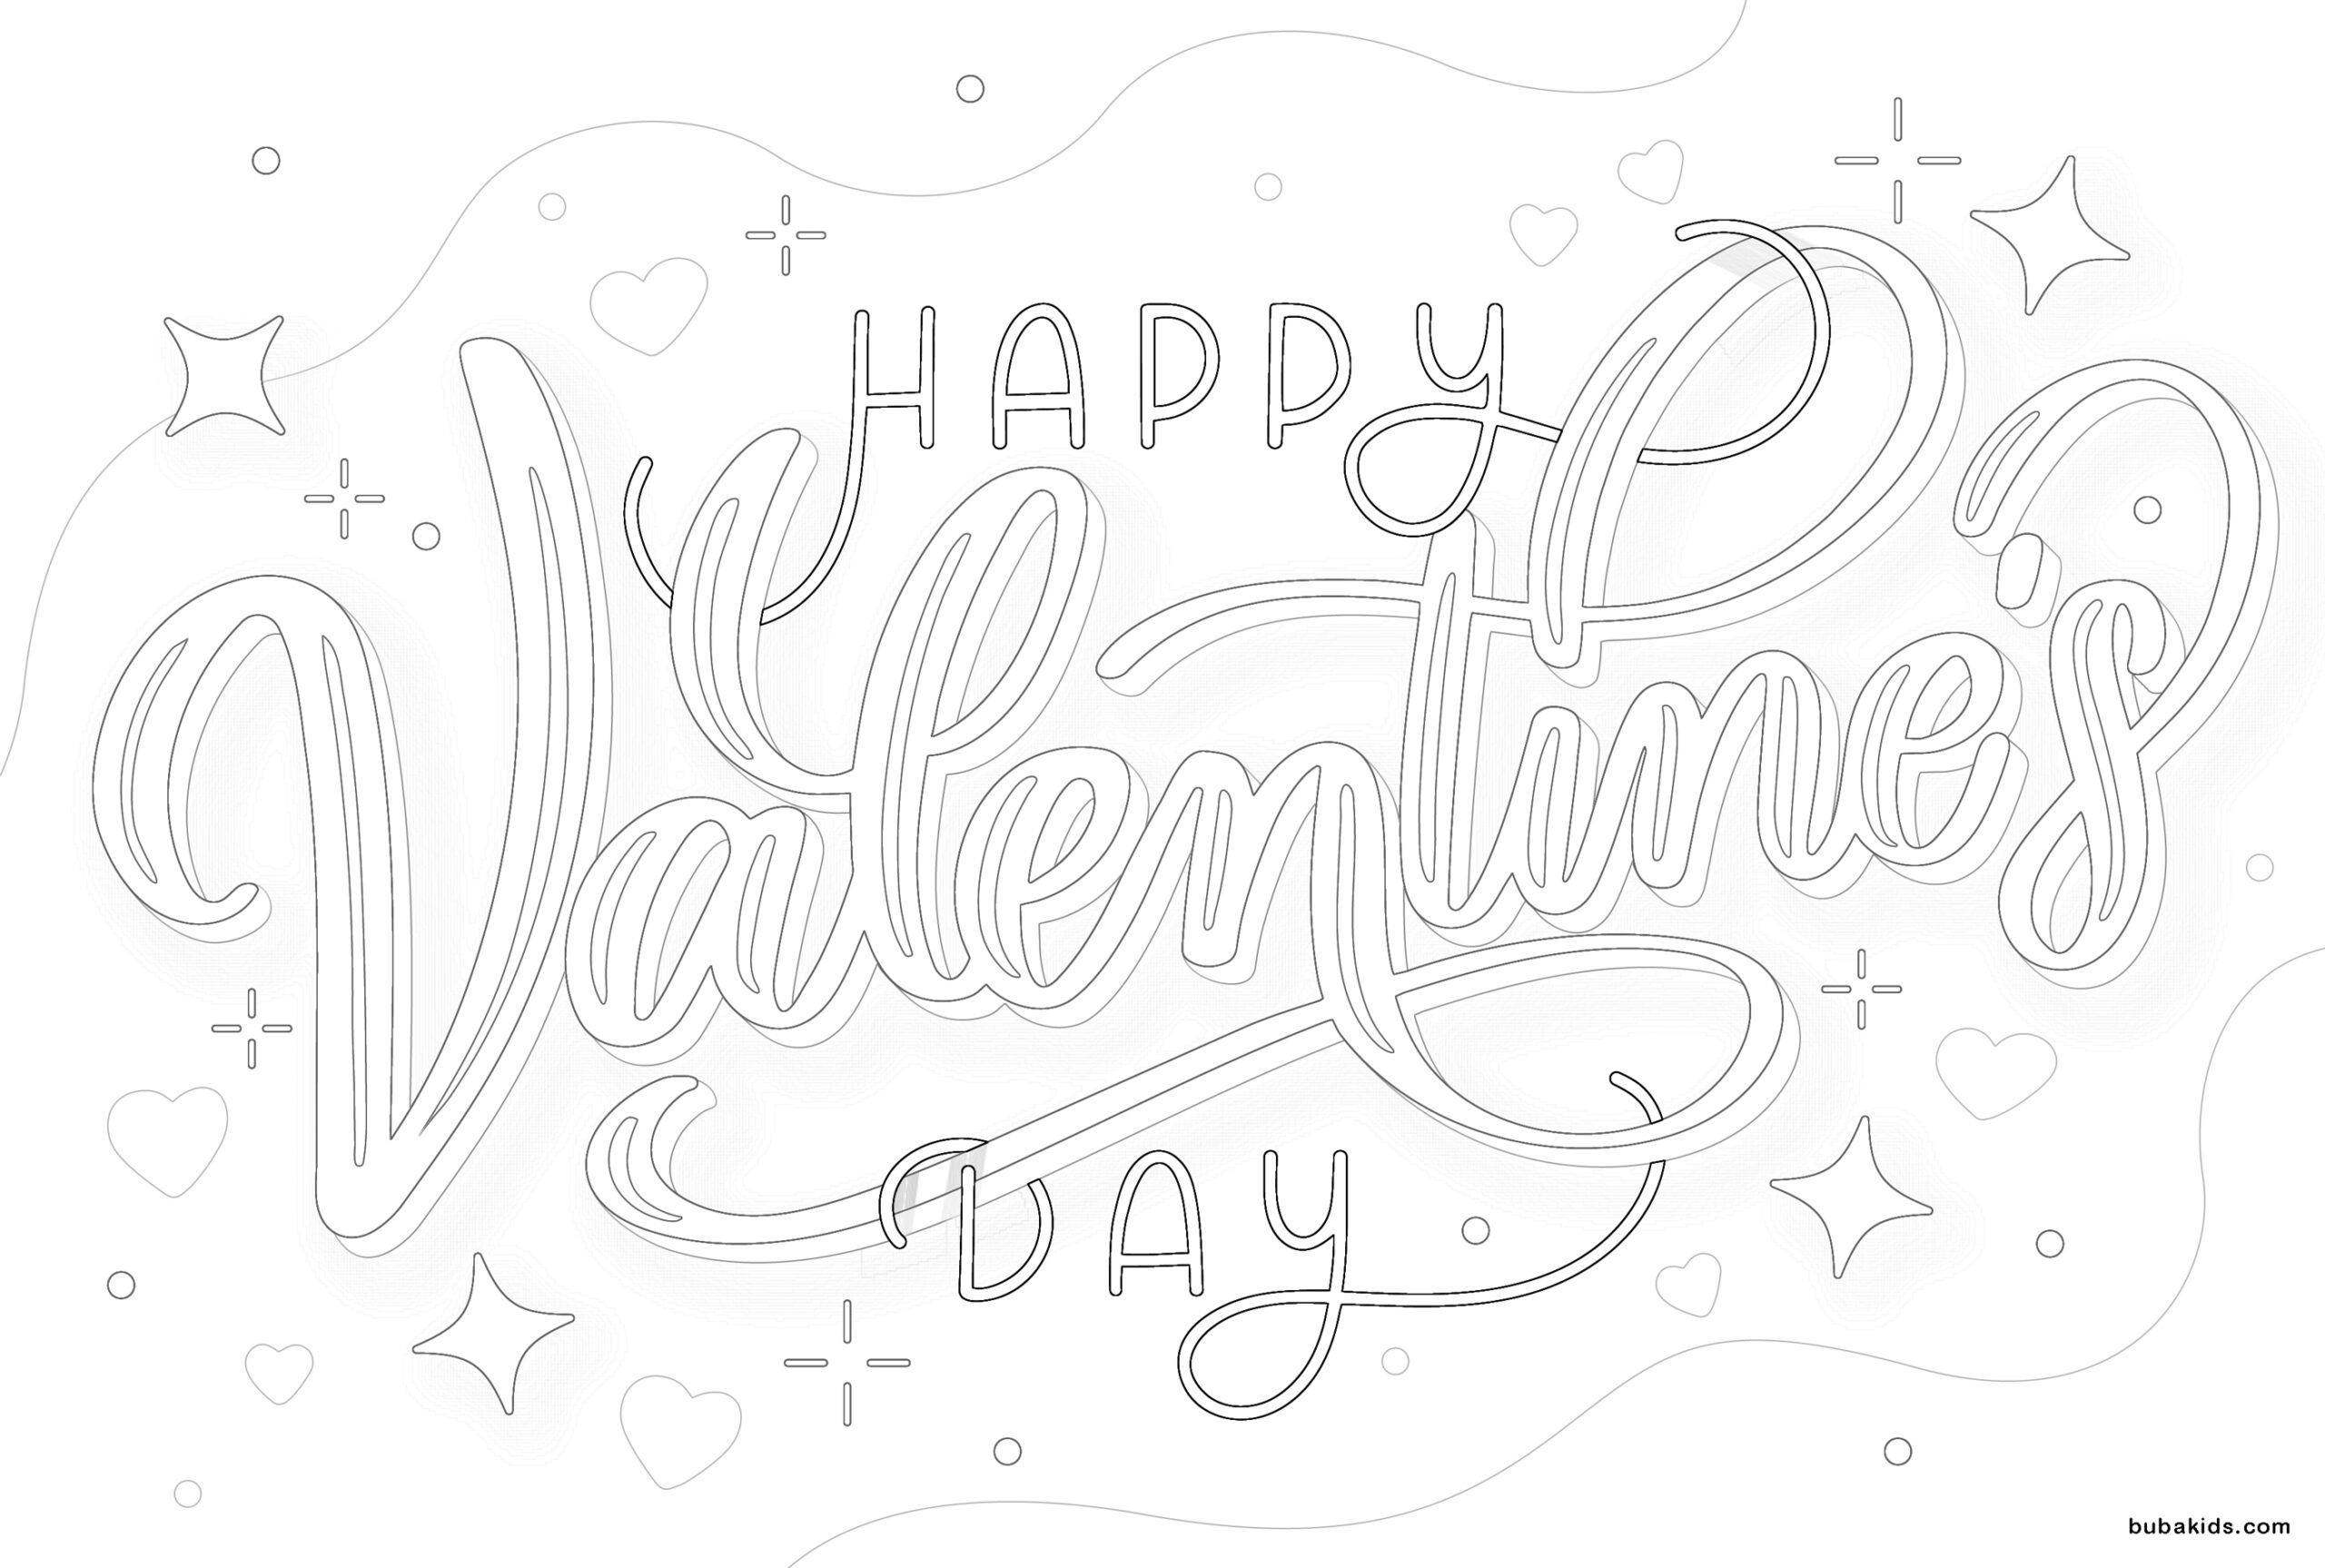 Happy valentine’s day coloring page